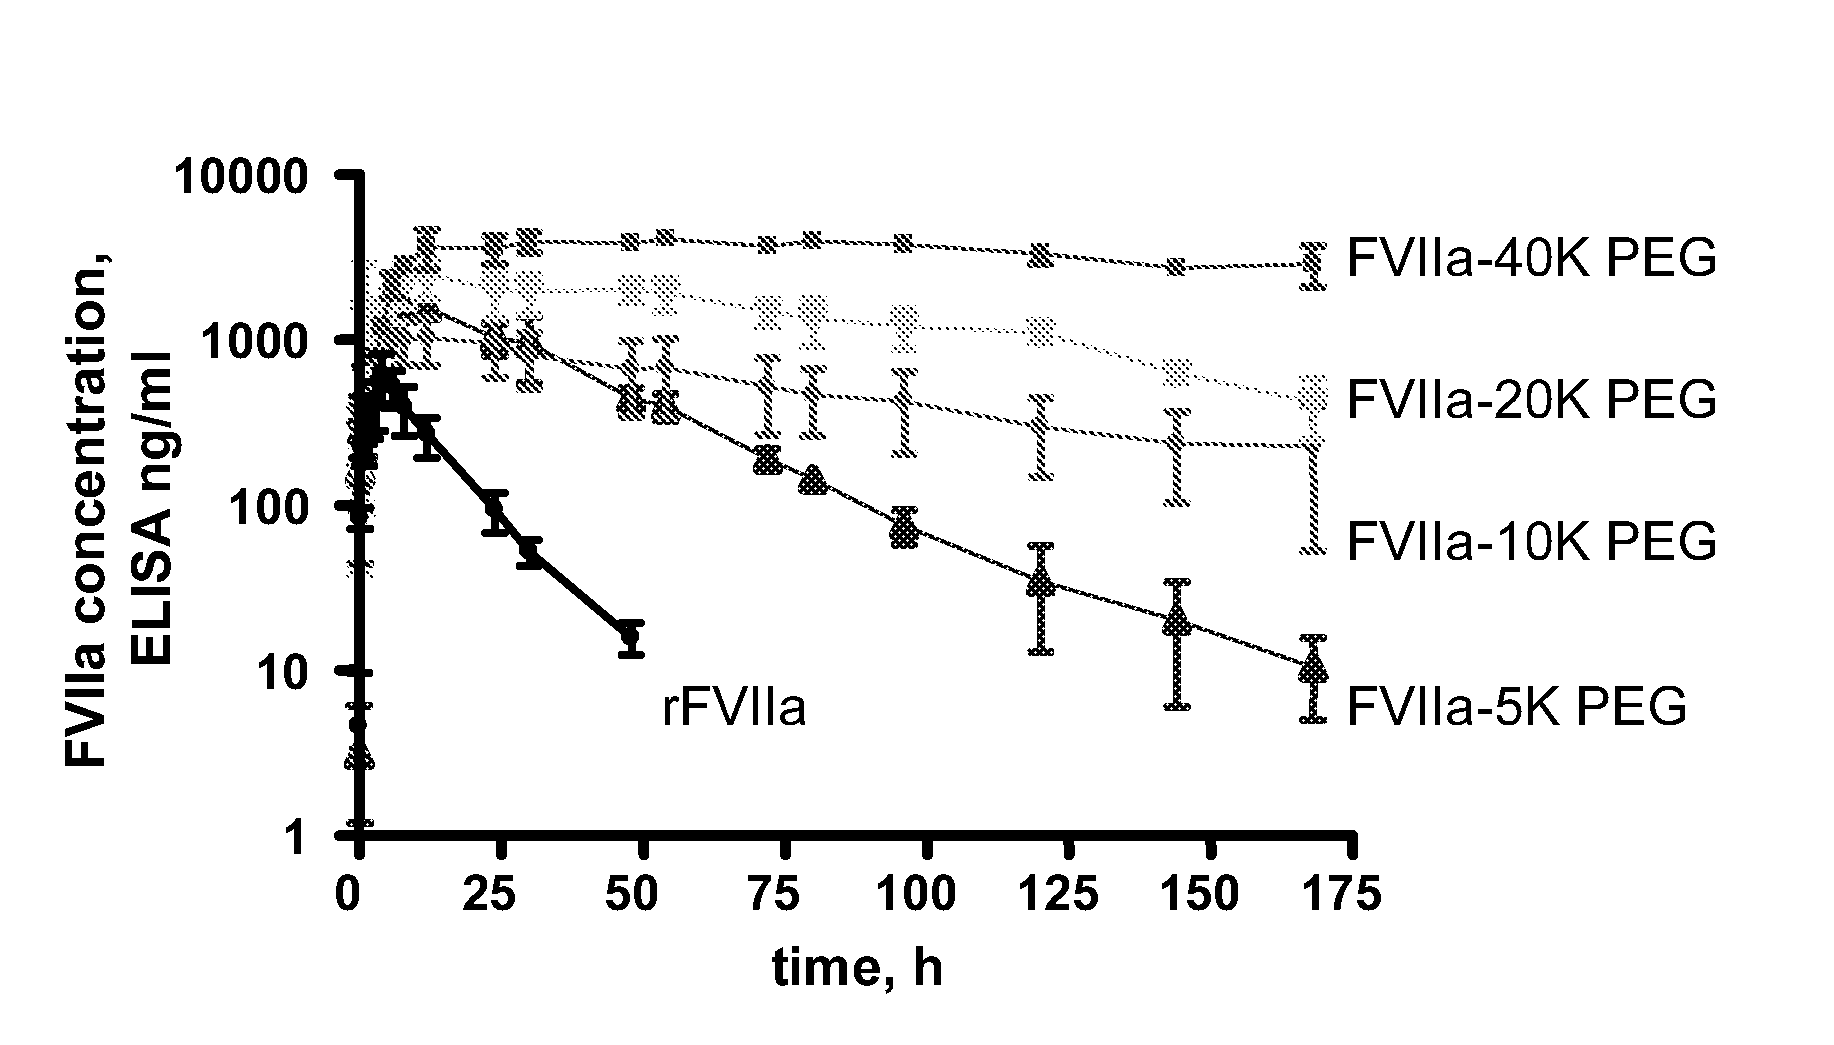 SUBCUTANEOUS ADMINISTRATION OF COAGULATION FACTOR VIIa-RELATED POLYPEPTIDES